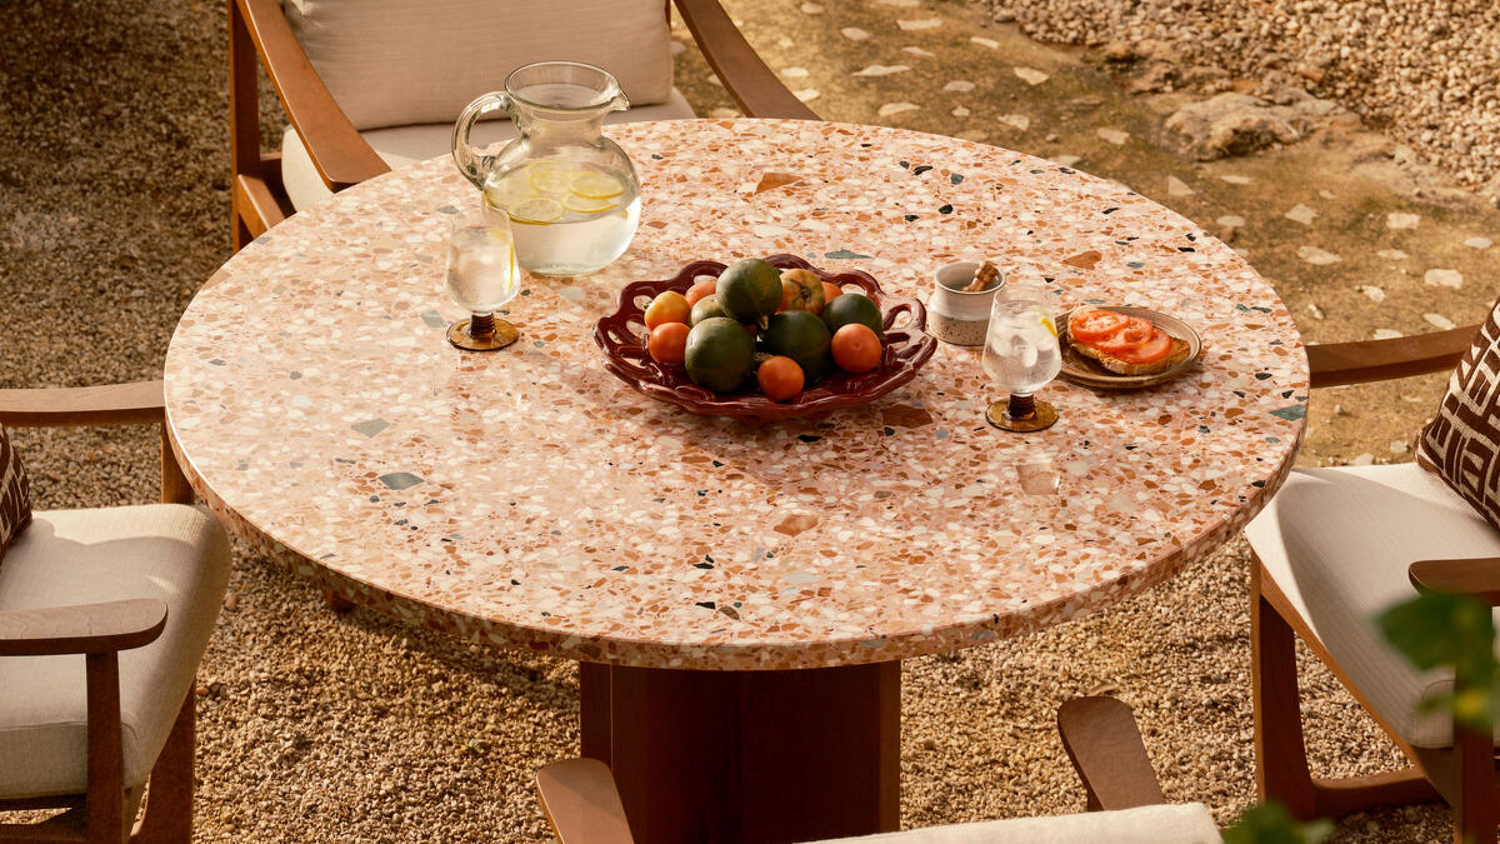 Japandi Outdoor Collection, shown Soho Home outdoor table